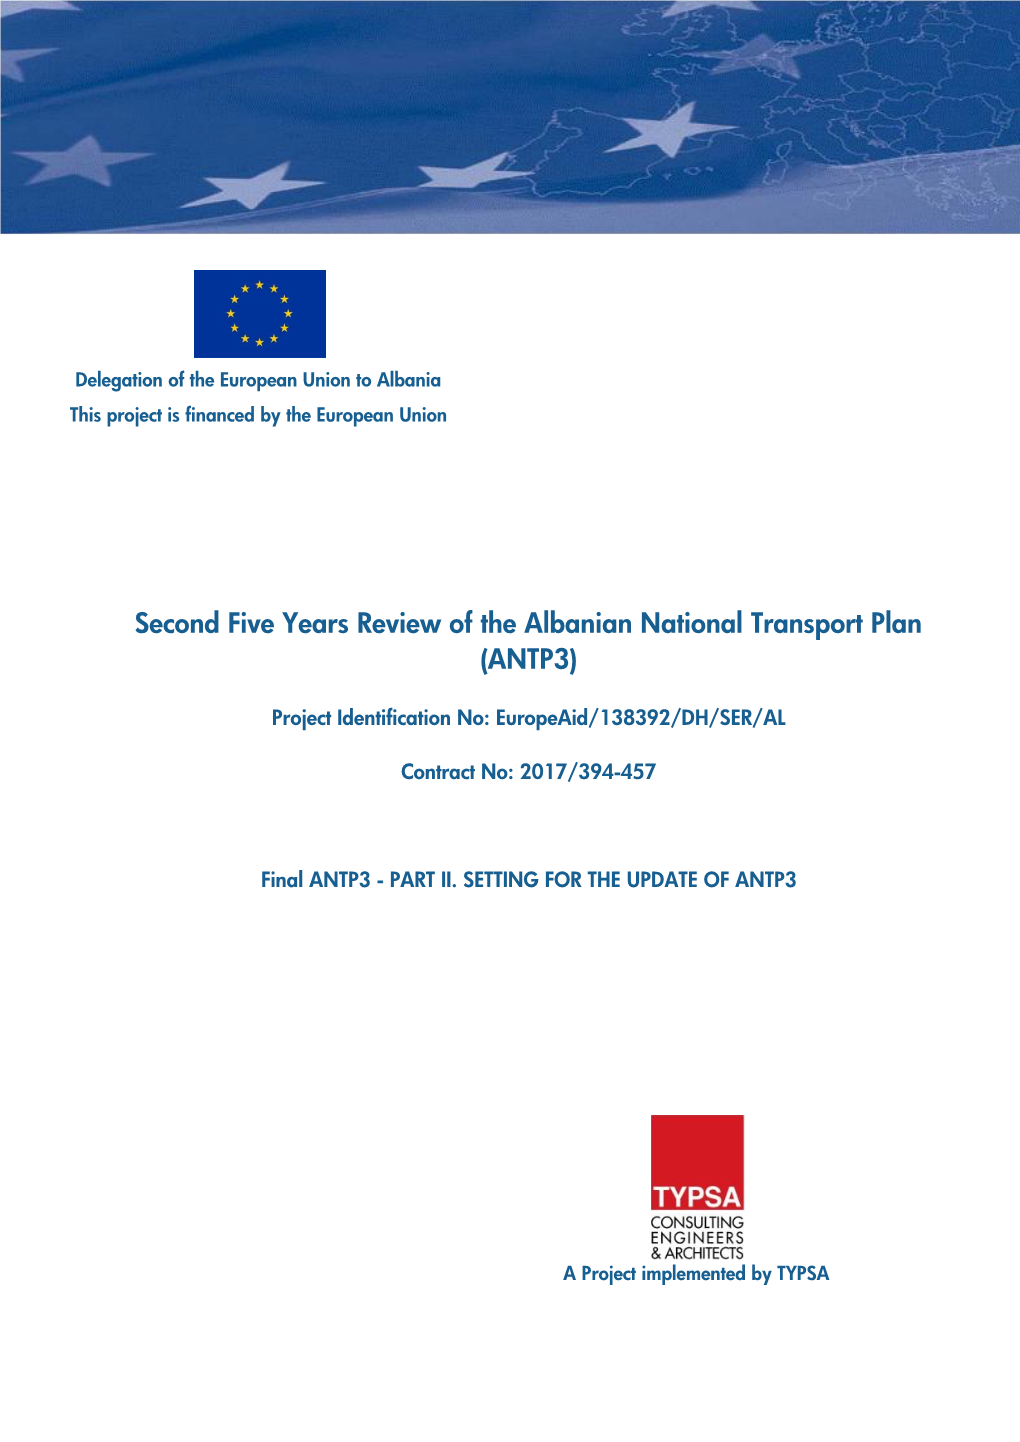 Second Five Years Review of the Albanian National Transport Plan (ANTP3)